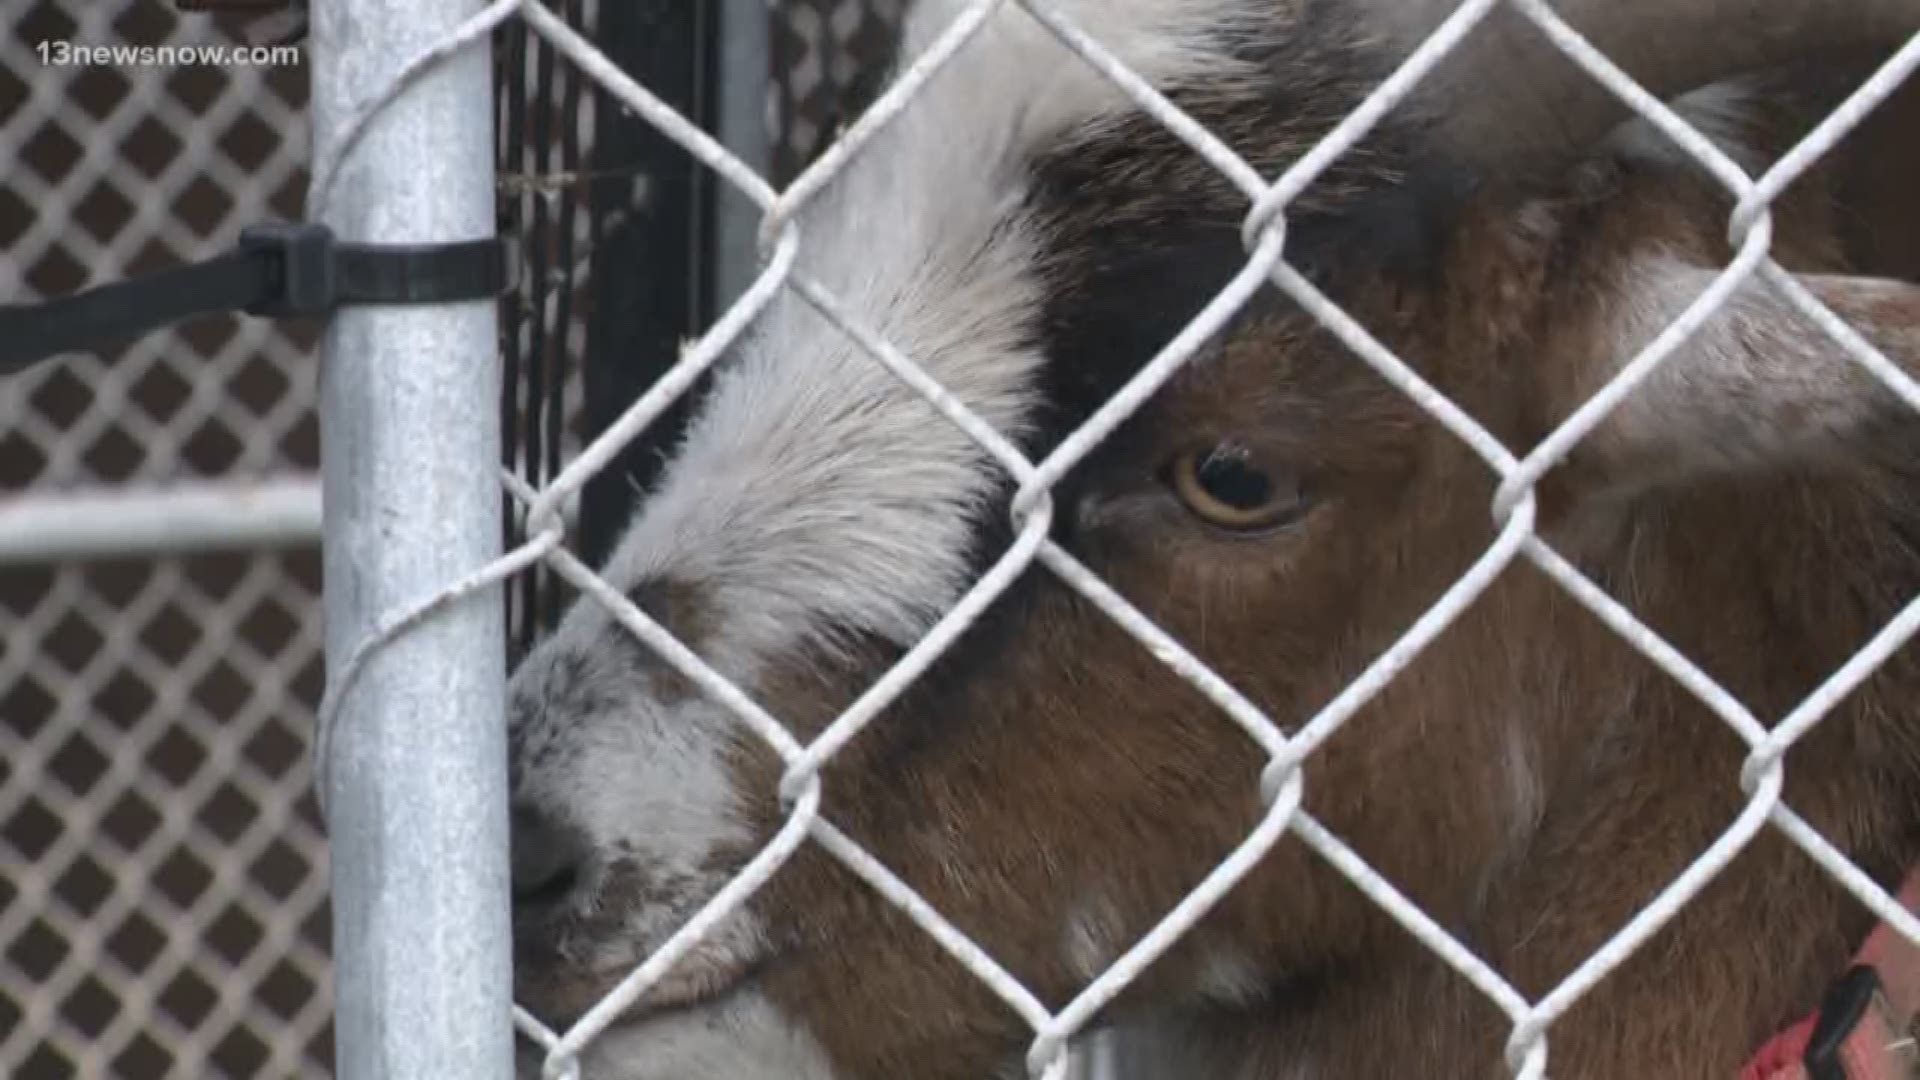 The Outer Banks SPCA is overwhelmed after they had to seize more than 80 animals from a home in Wanchese.